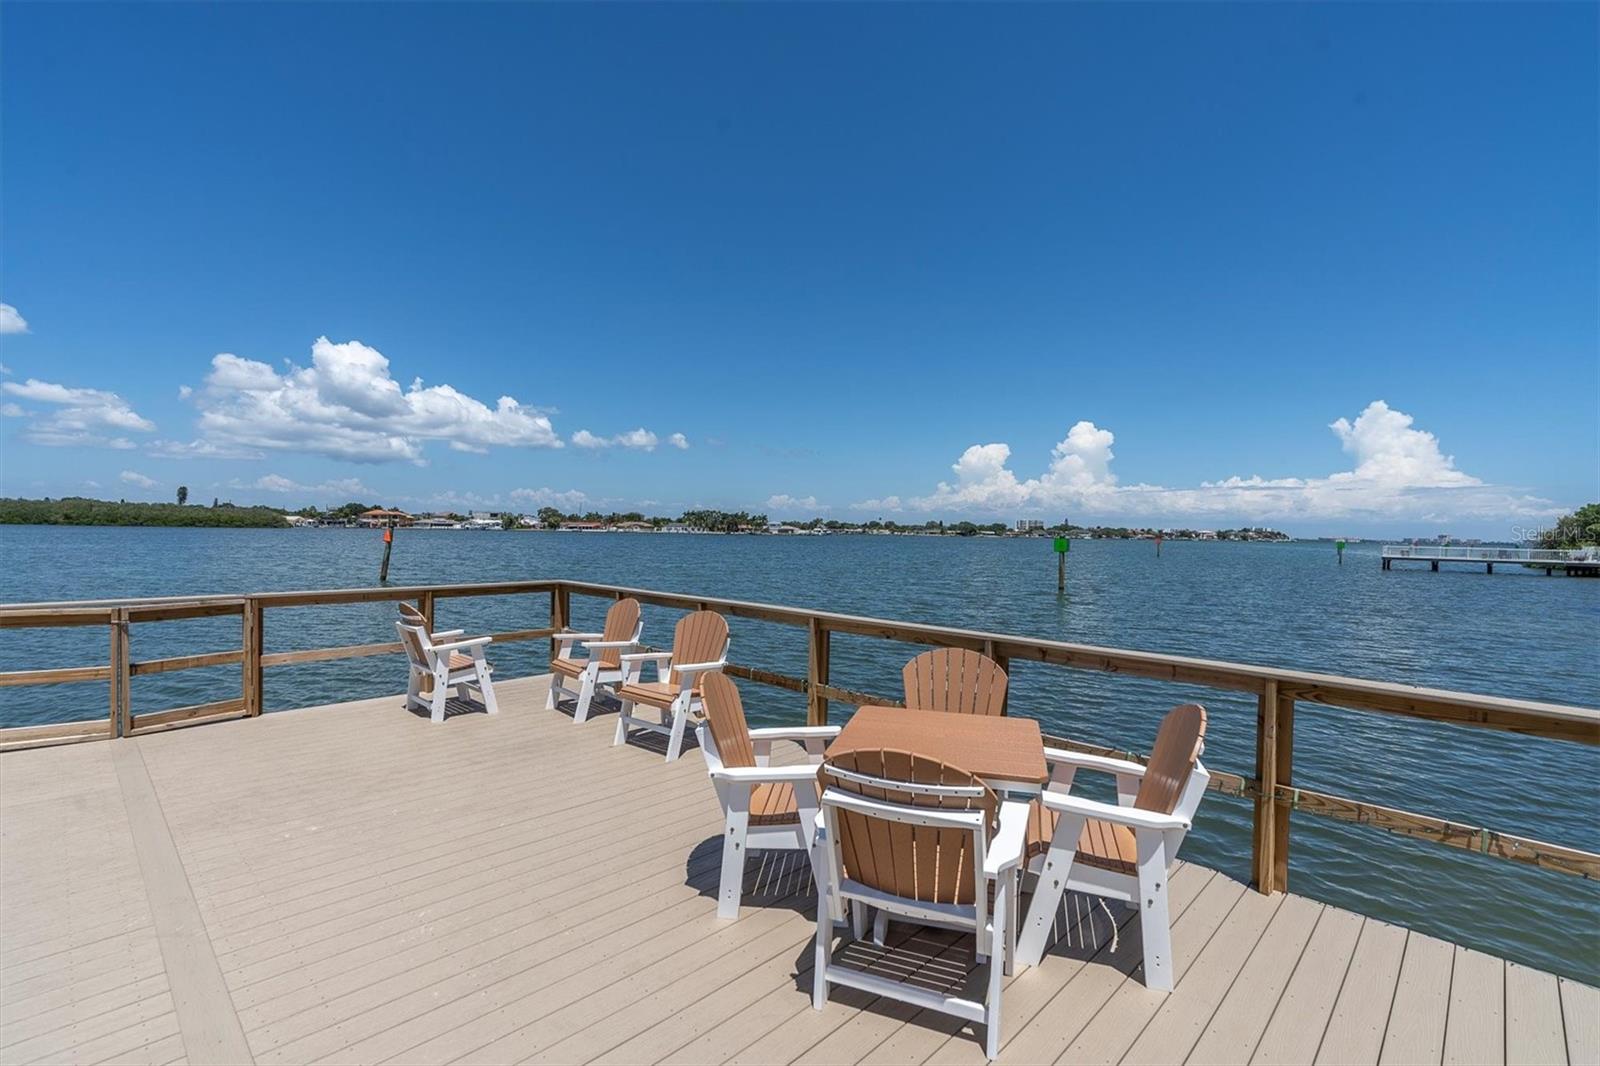 Enjoy a glass of wine on the dock!